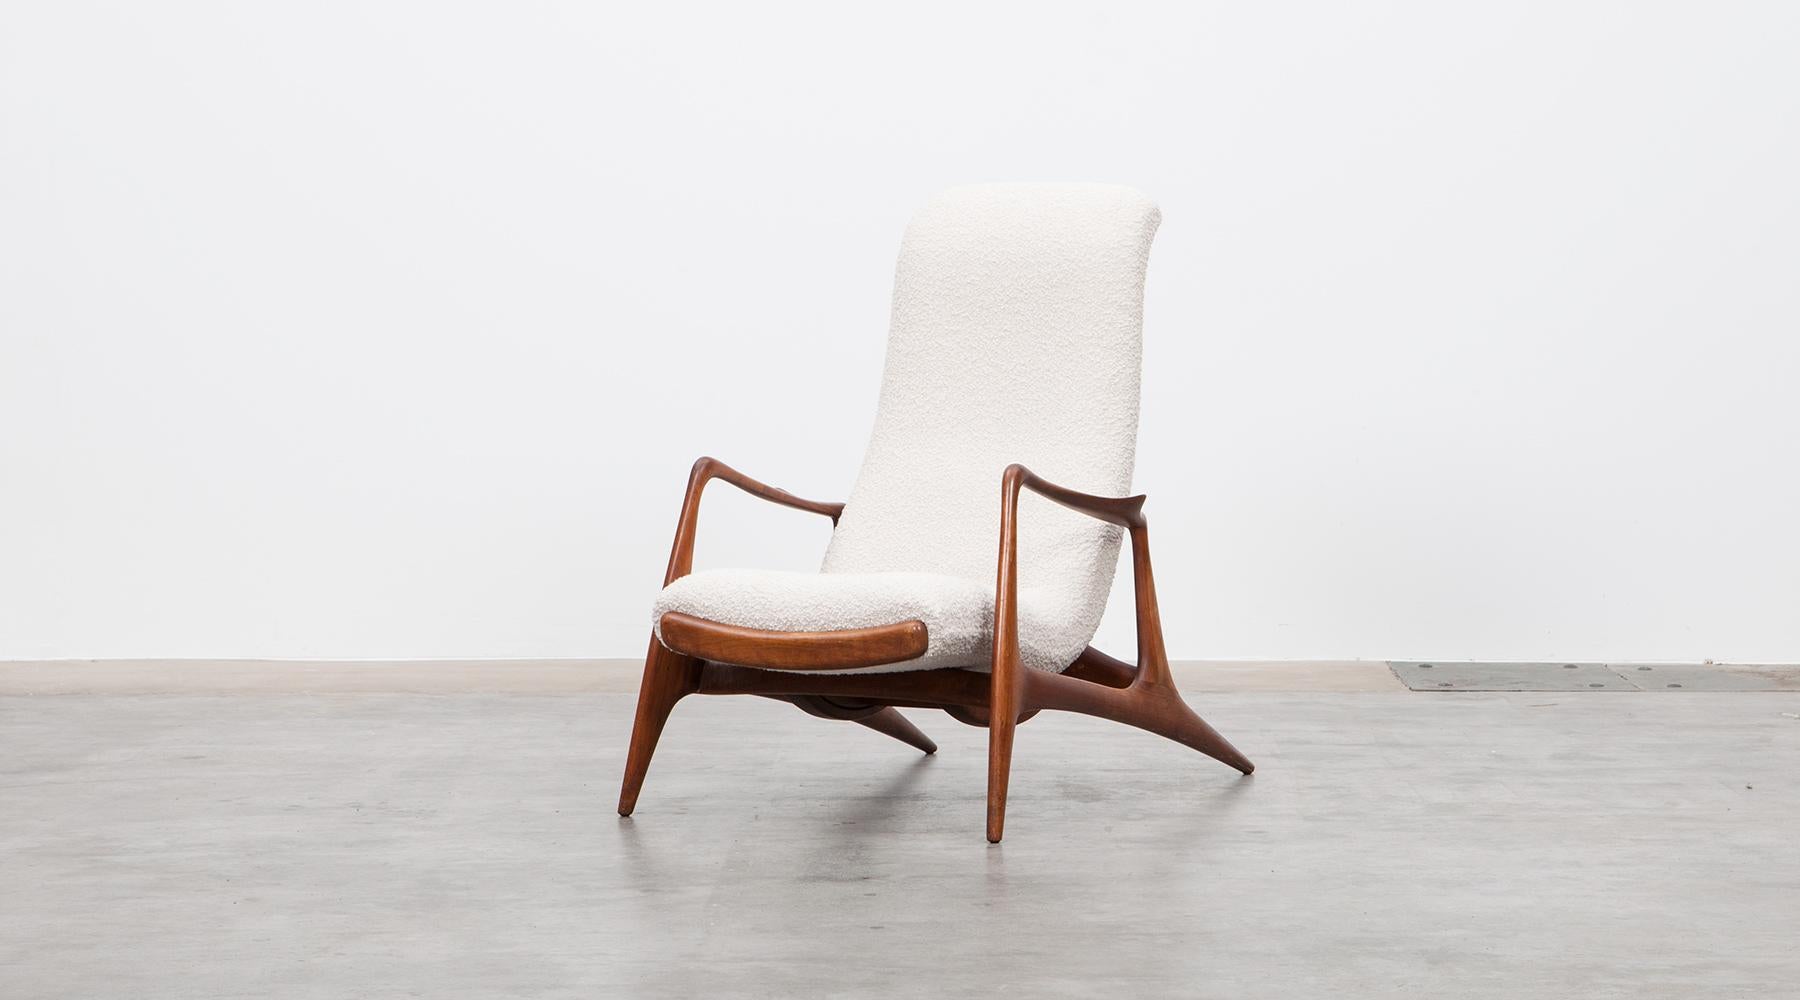 Mid-17th Century 1950s Teak and White Upholstery Lounge Chair by Vladimir Kagan